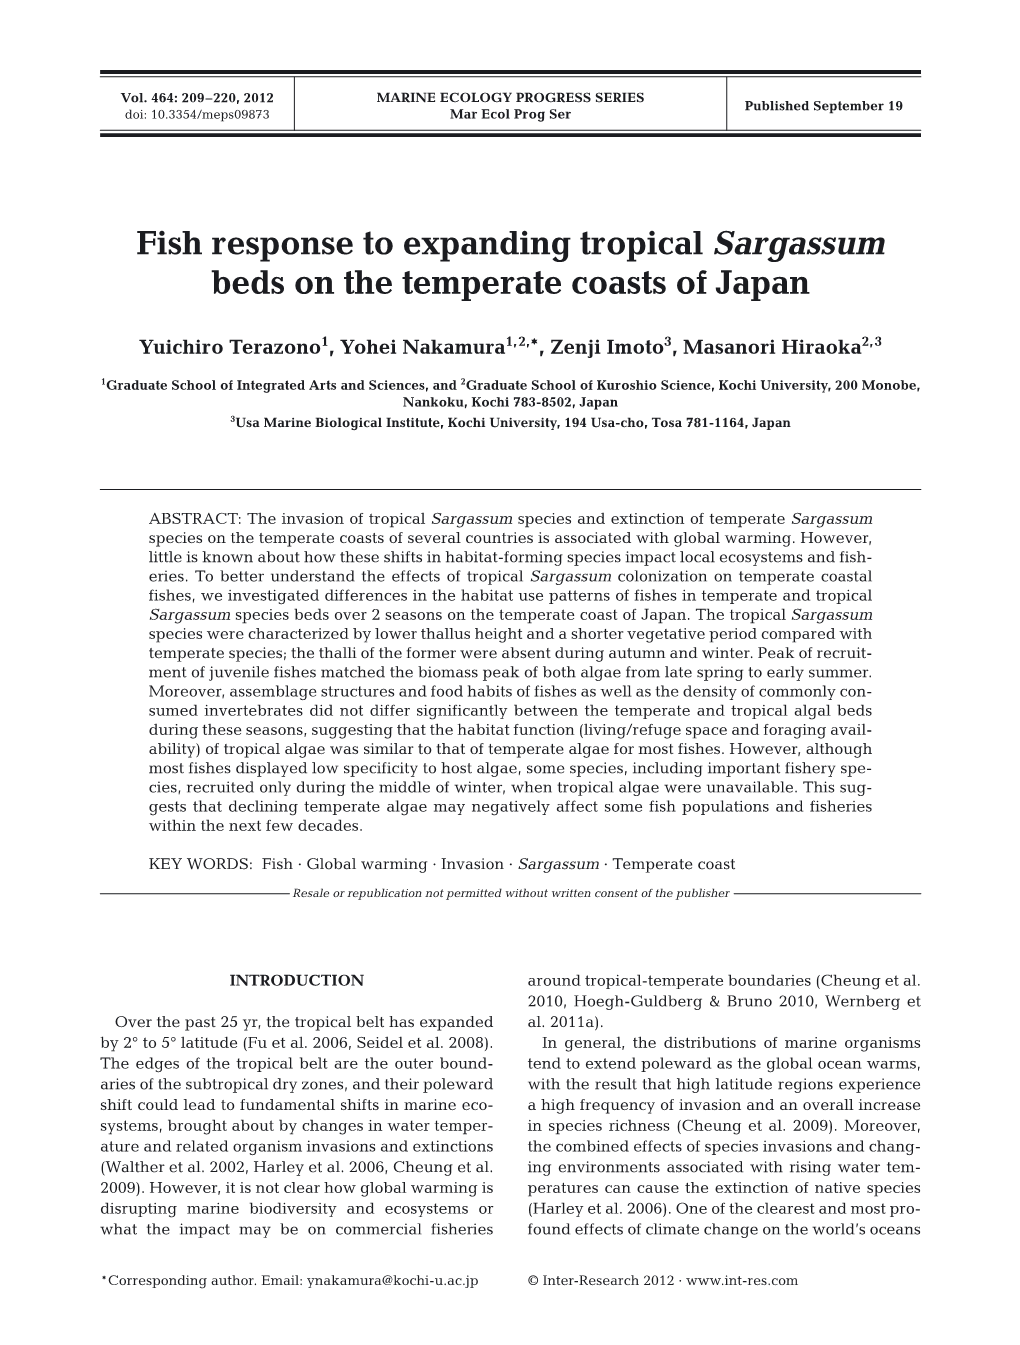 Fish Response to Expanding Tropical Sargassum Beds on the Temperate Coasts of Japan